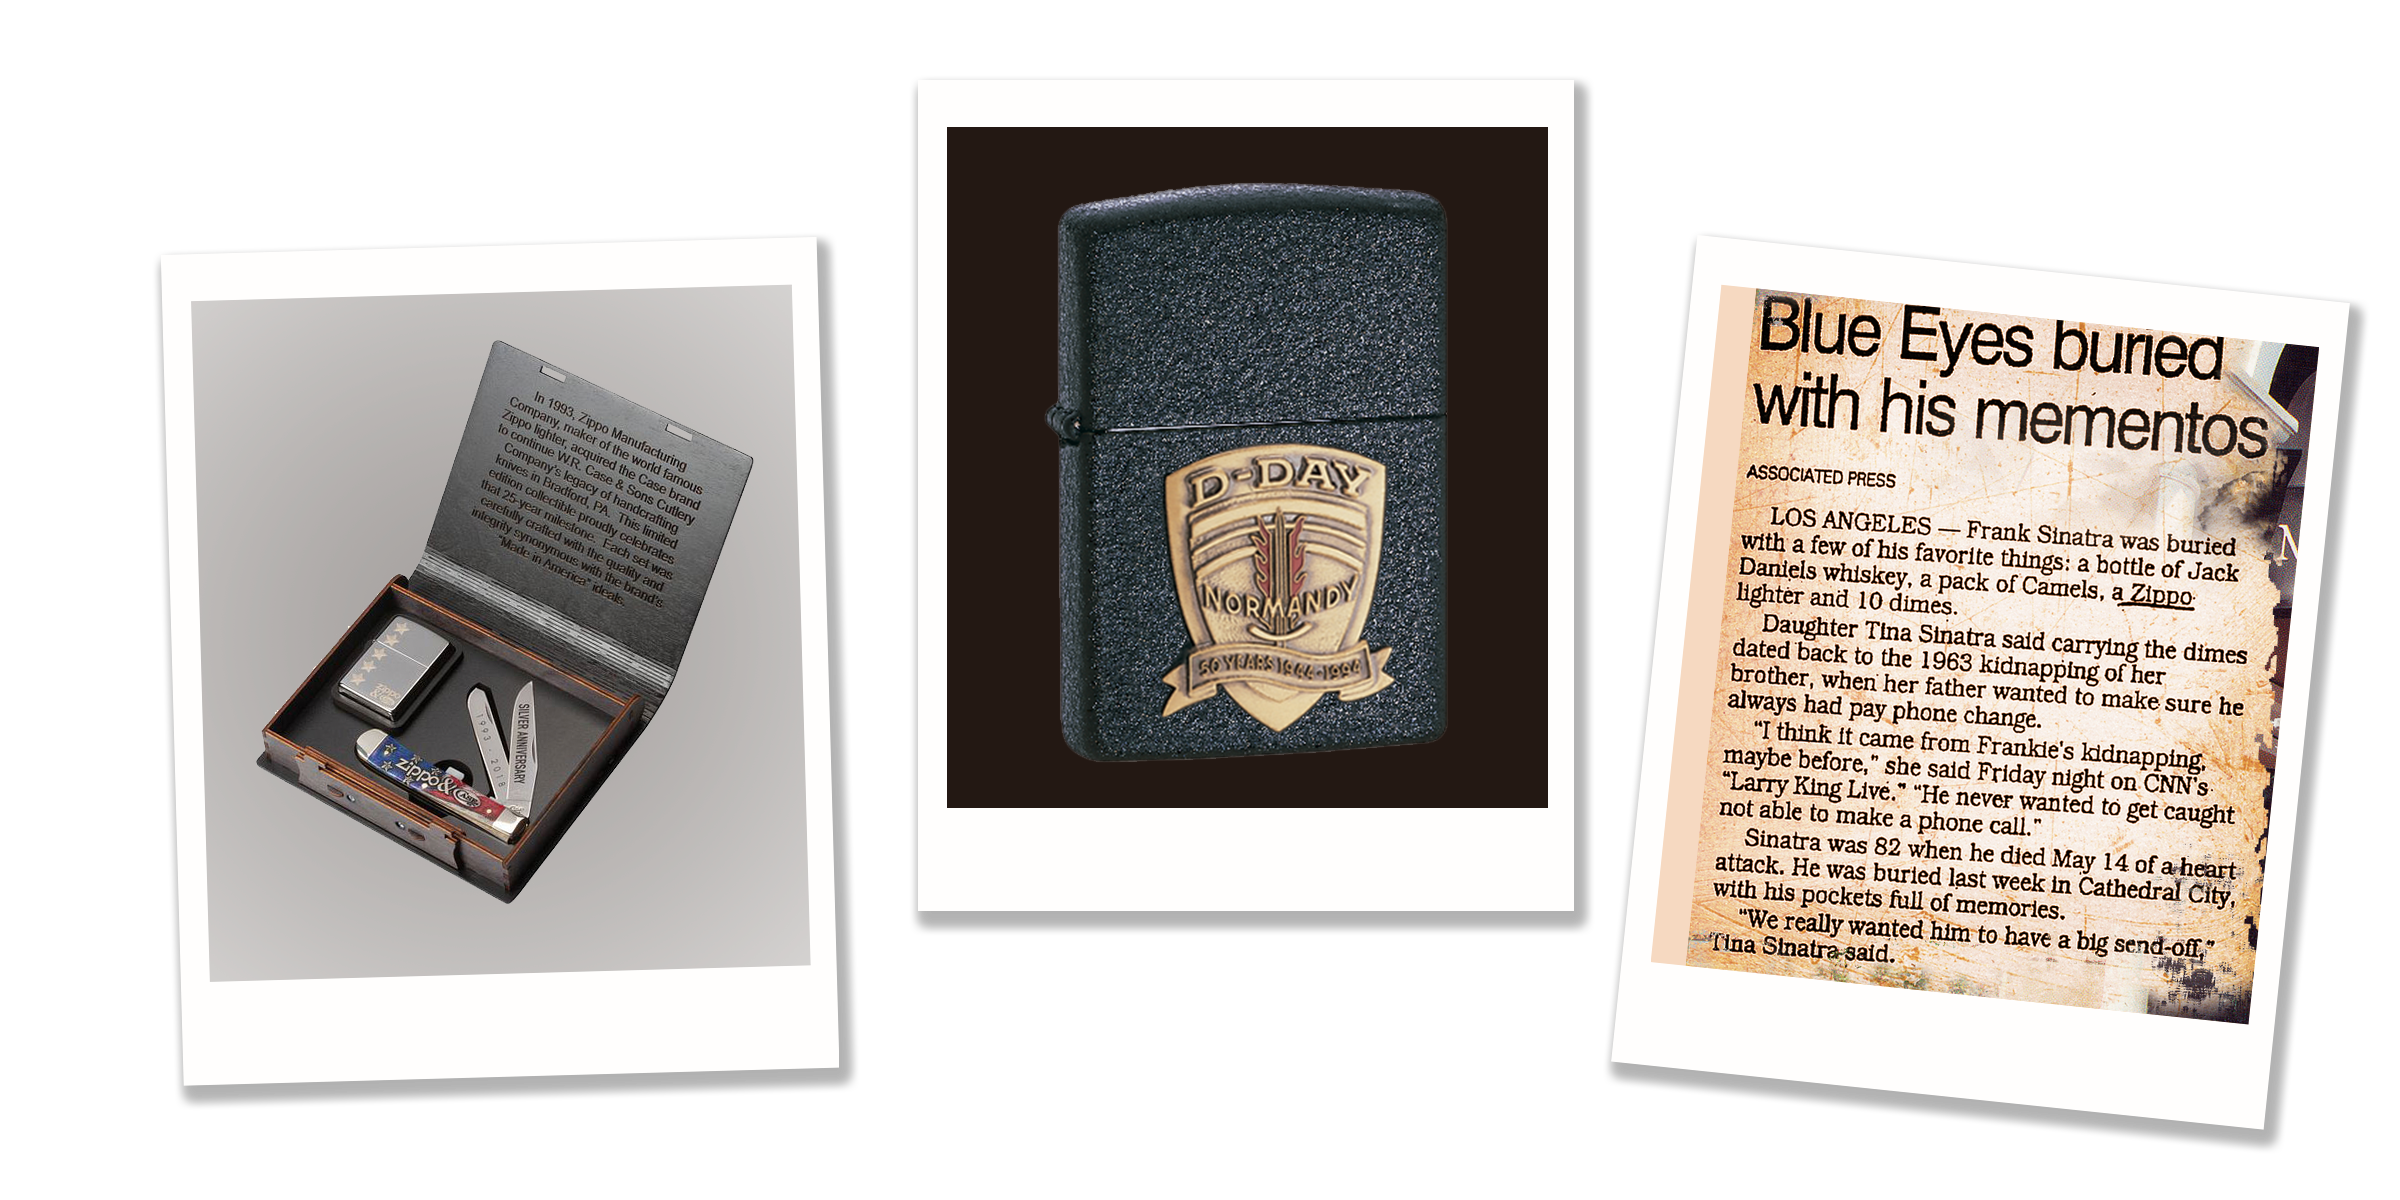 Zippo + Case knife set, D-Day 50th Anniversary Commemorative lighter, LA Times article about Frank Sinatra's burial.